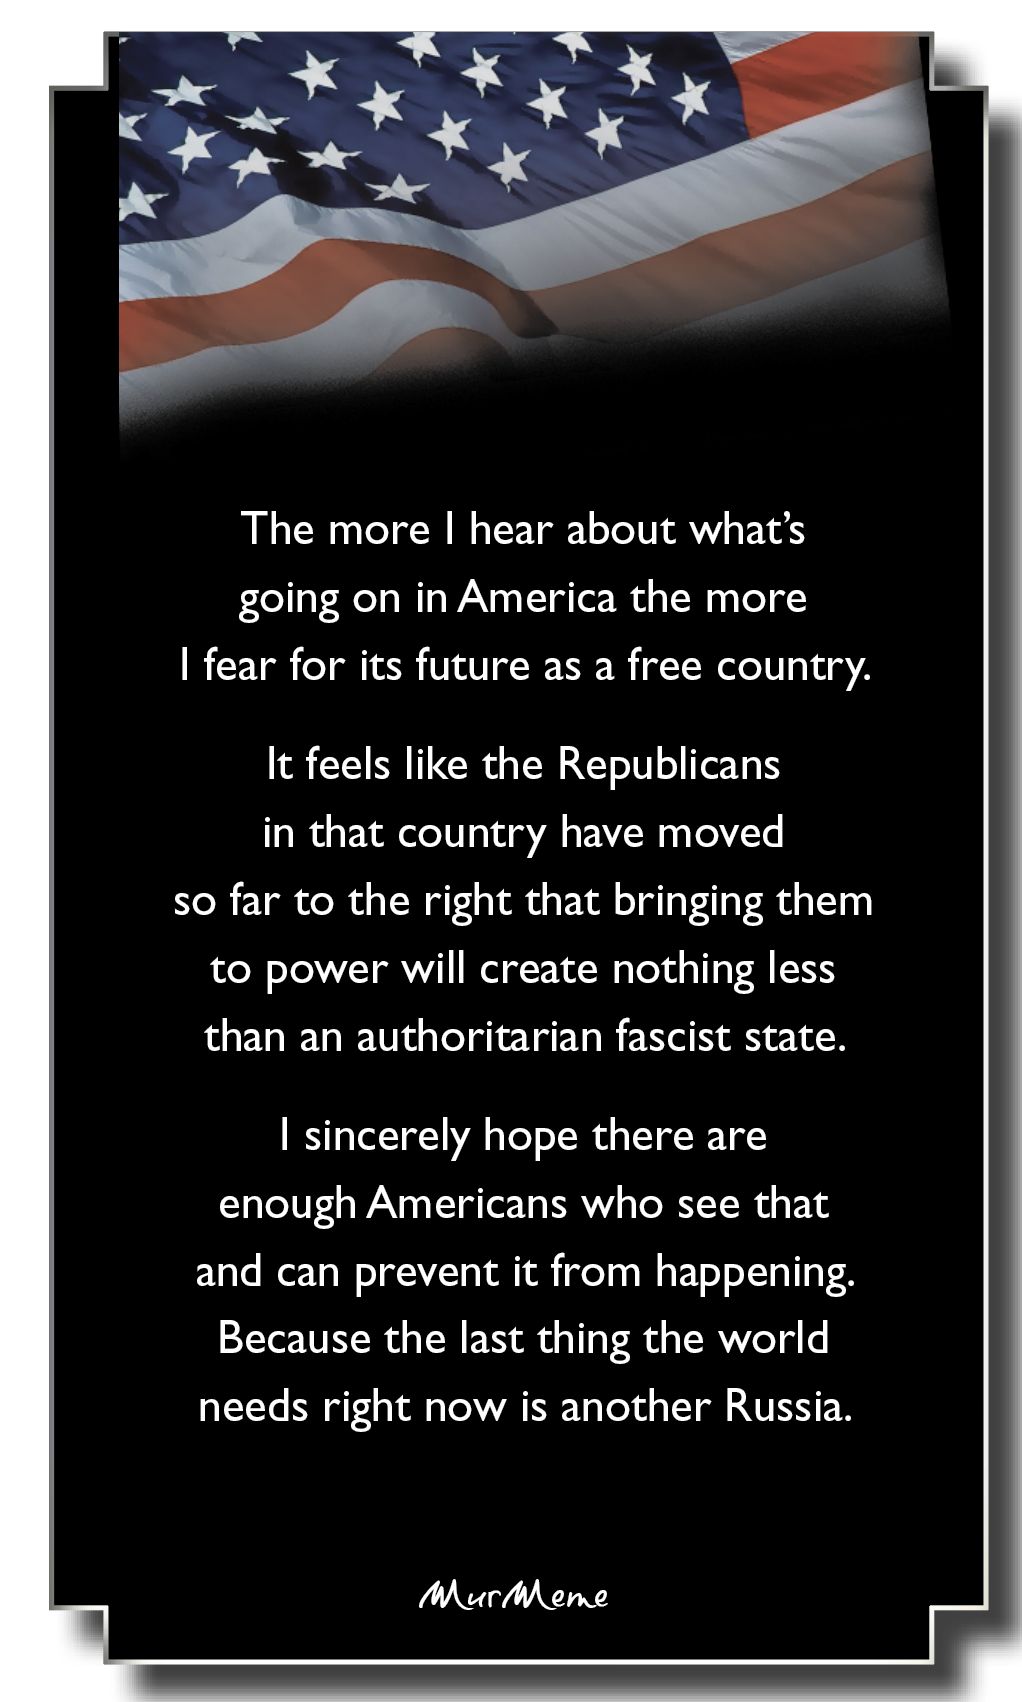 The more | hear about what's

going on in America the more

| fear for its future as a free country.

It feels like the Republicans
in that country have moved
so far to the right that bringing them
to power will create nothing less
than an authoritarian fascist state.

| sincerely hope there are
enough Americans who see that
and can prevent it from happening.
Because the last thing the world
needs right now is another Russia.